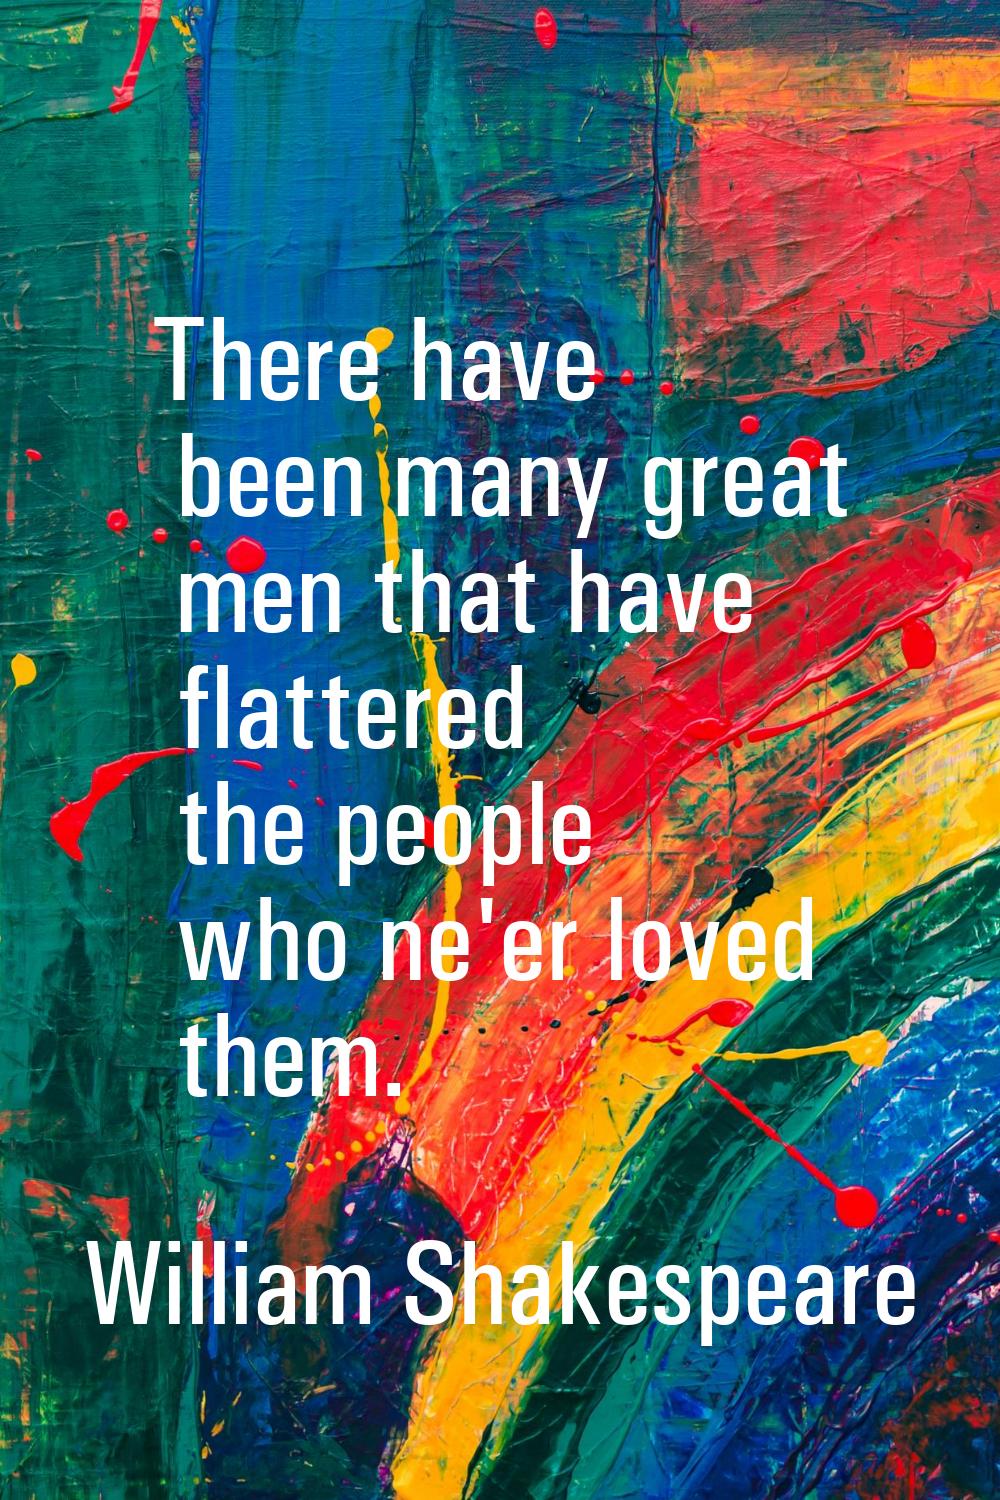 There have been many great men that have flattered the people who ne'er loved them.